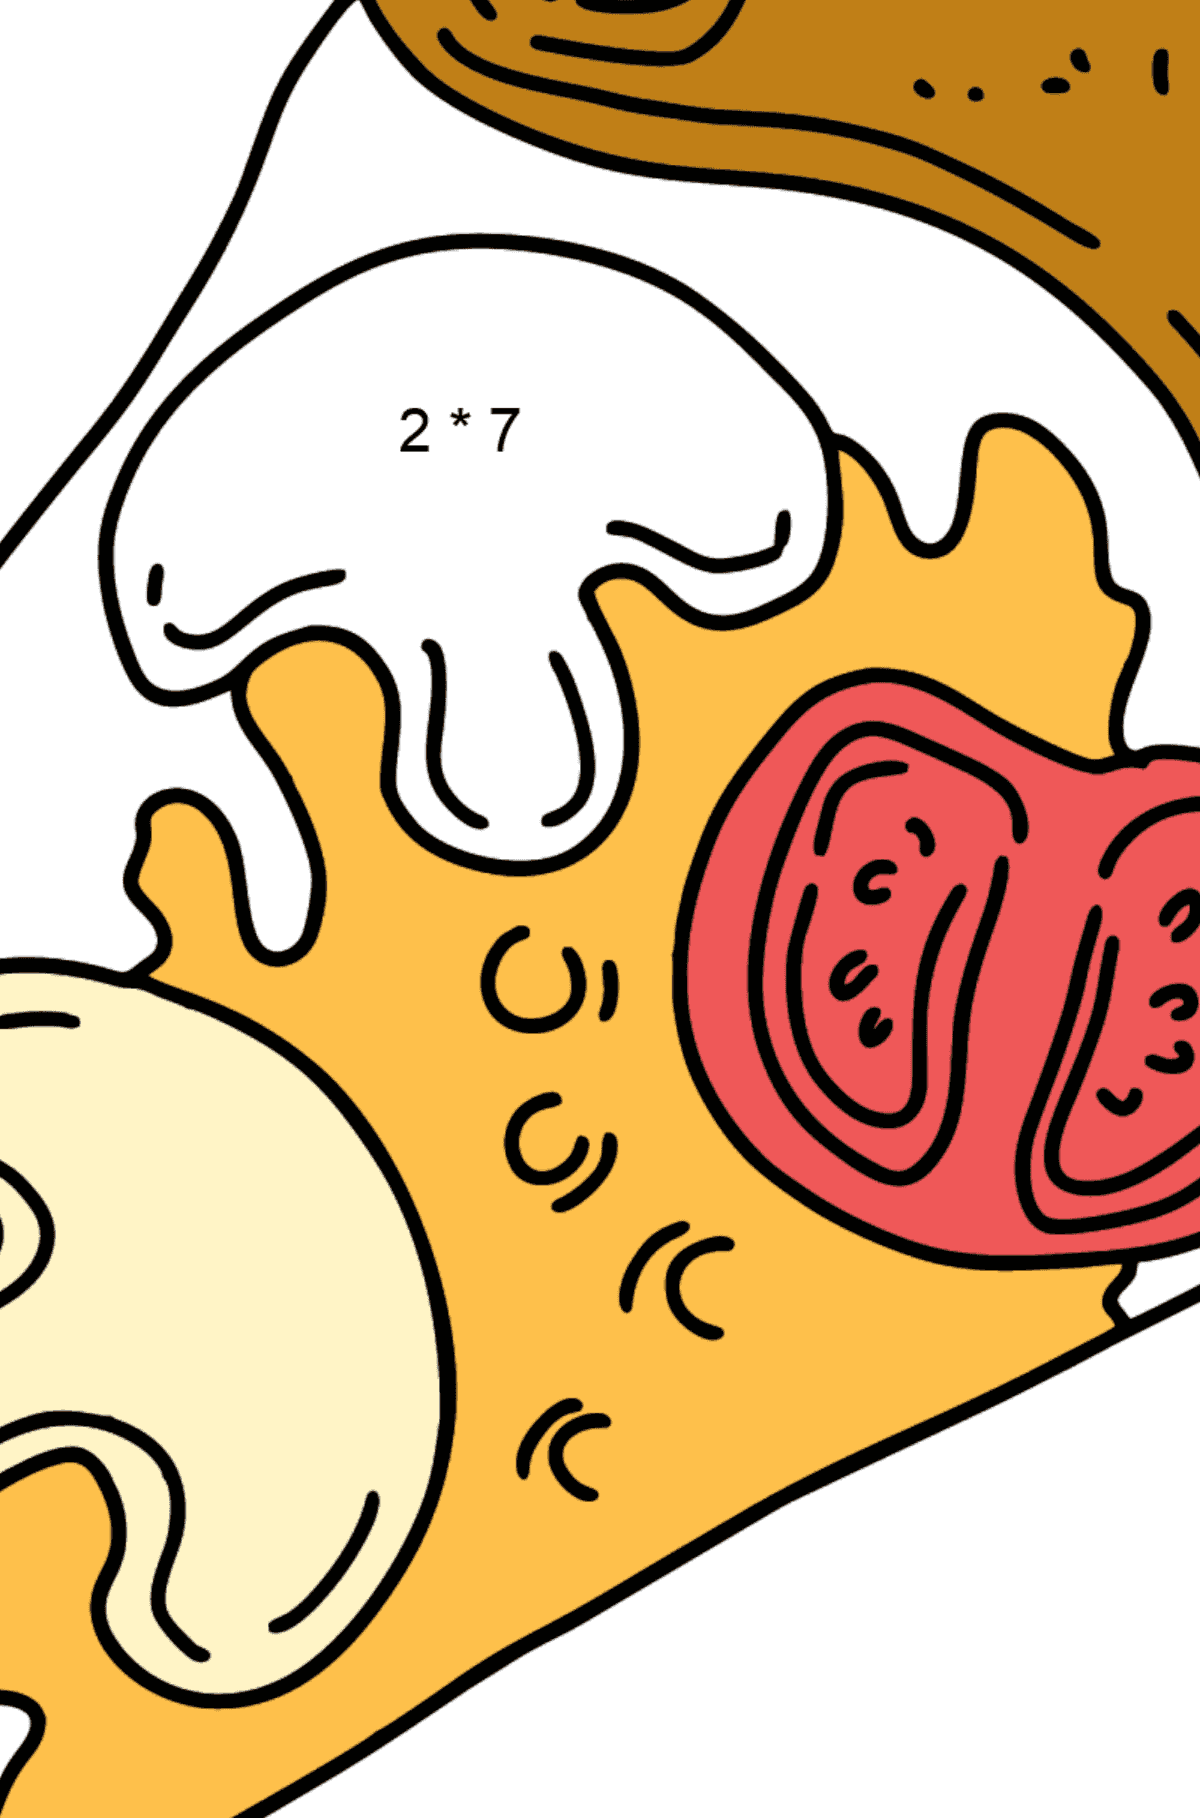 Pizza Mushrooms and Tomatoes coloring page - Math Coloring - Multiplication for Kids